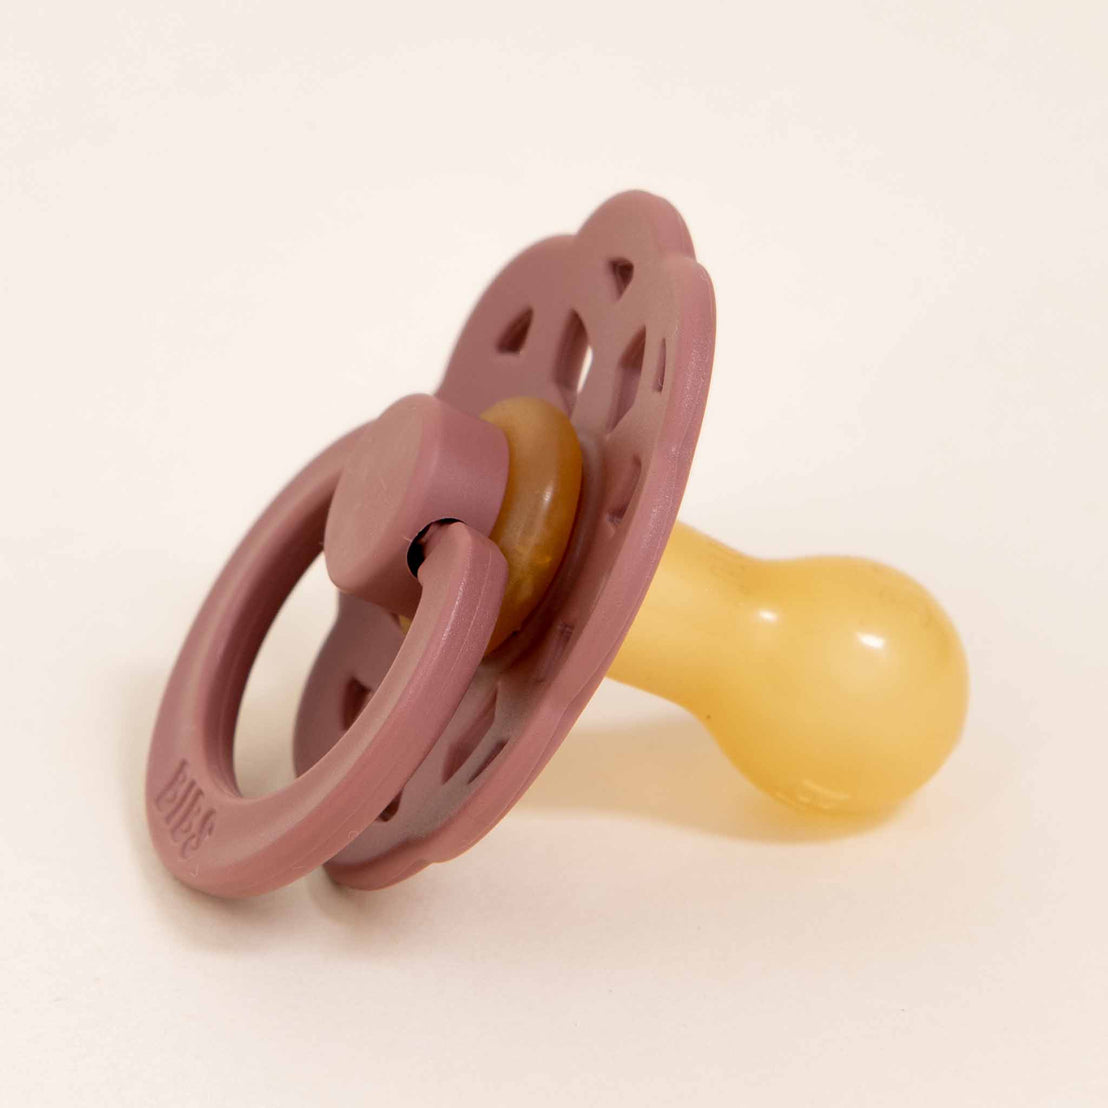 A Bibs Lace Pacifier in Woodchuck with a rubber nipple, featuring a bohemian-inspired design on the shield, set against a light beige background.